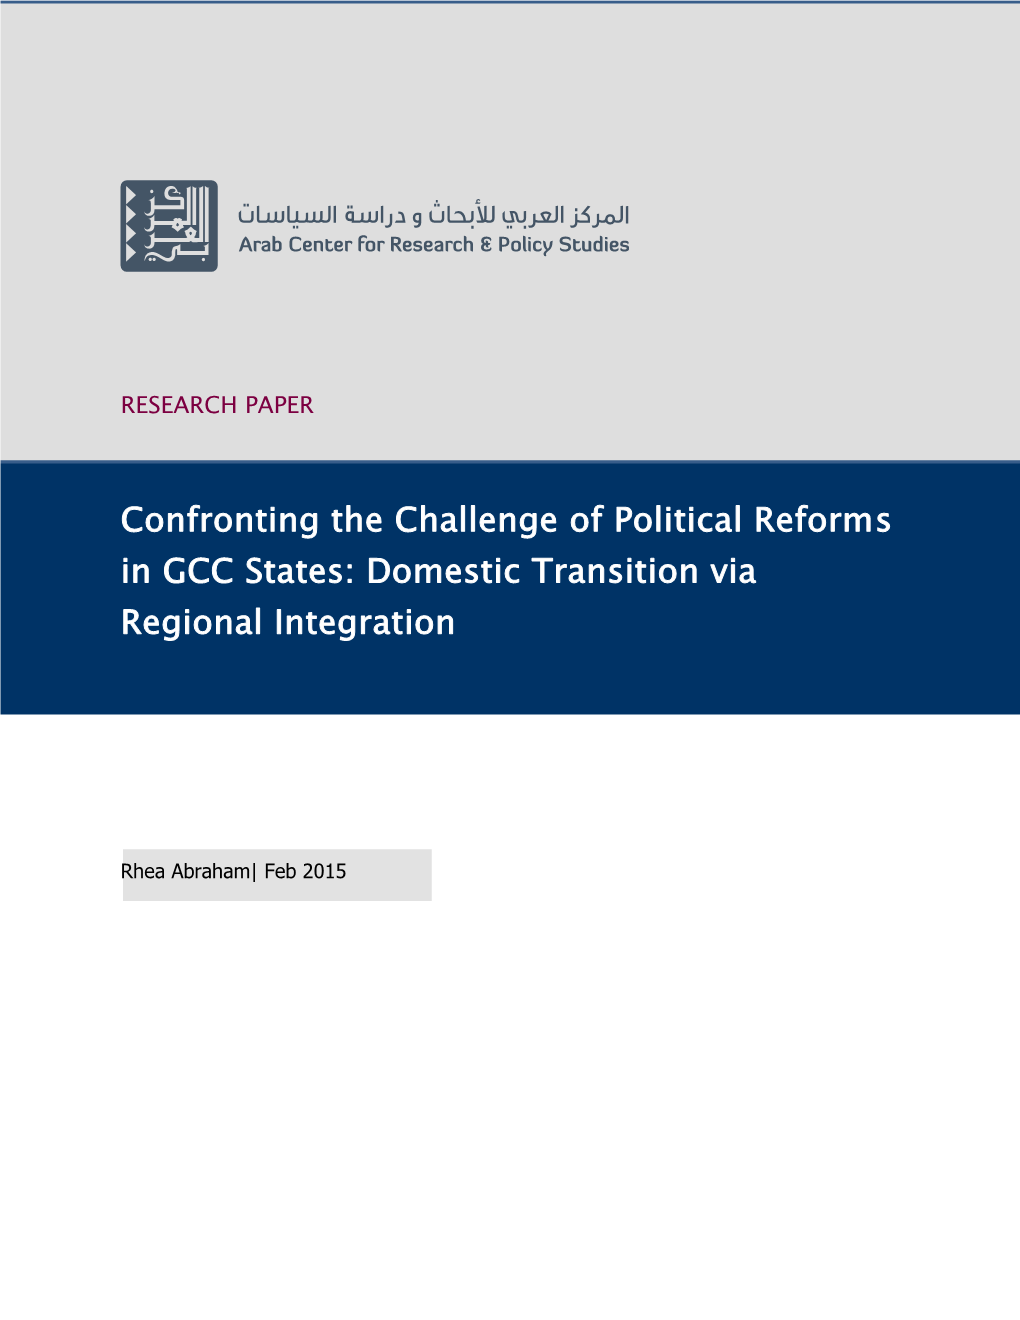 Confronting the Challenge of Political Reforms in GCC States: Domestic Transition Via Regional Integration